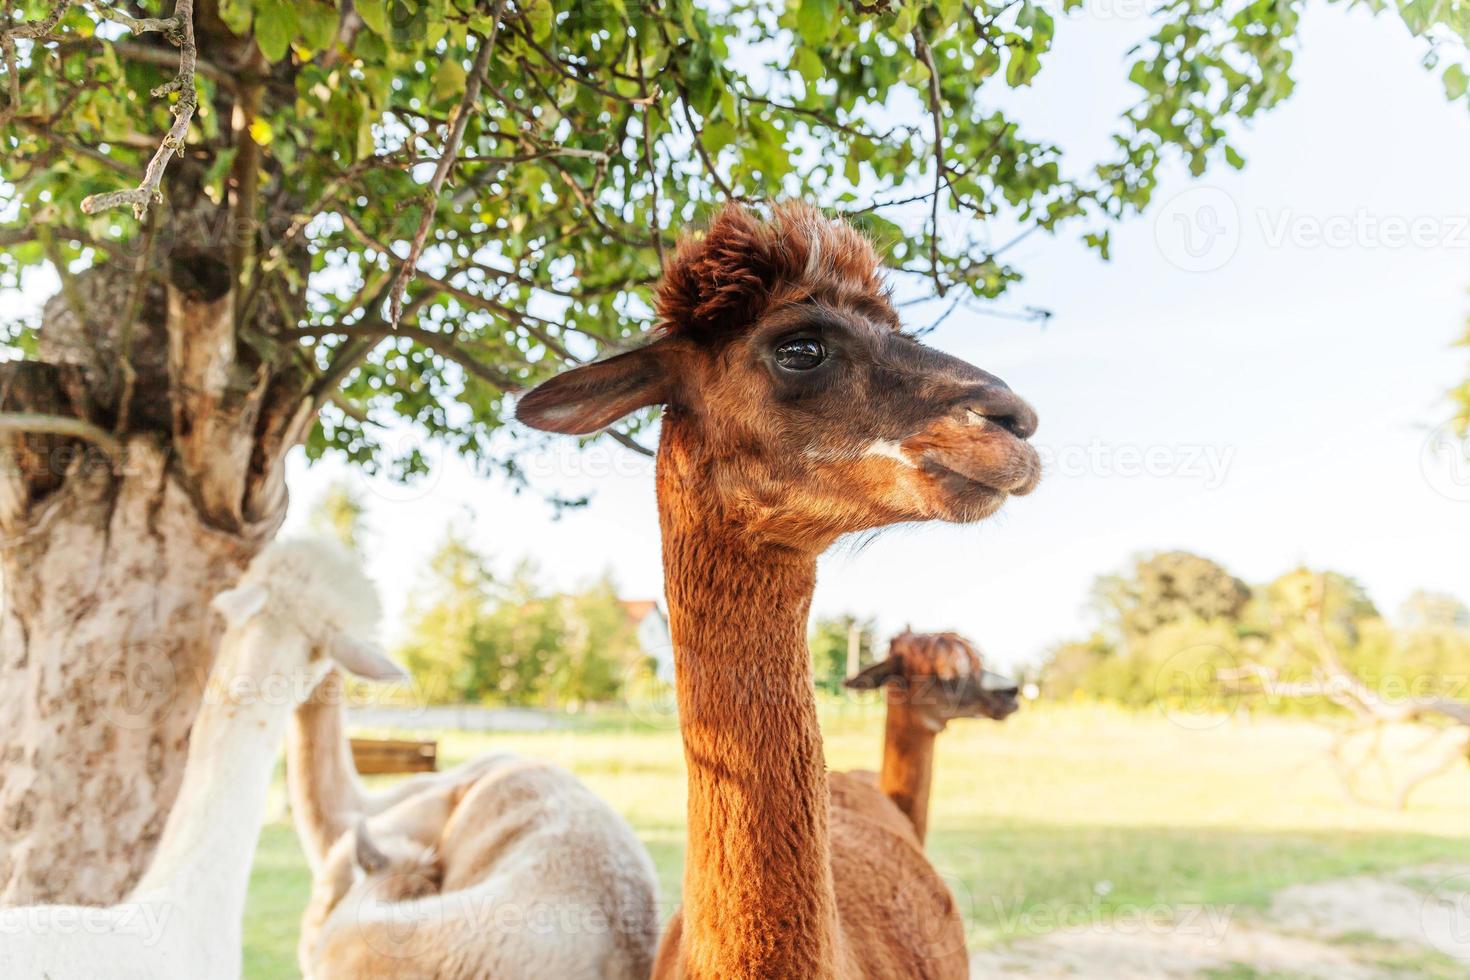 Cute alpaca with funny face relaxing on ranch in summer day. Domestic alpacas grazing on pasture in natural eco farm countryside background. Animal care and ecological farming concept photo